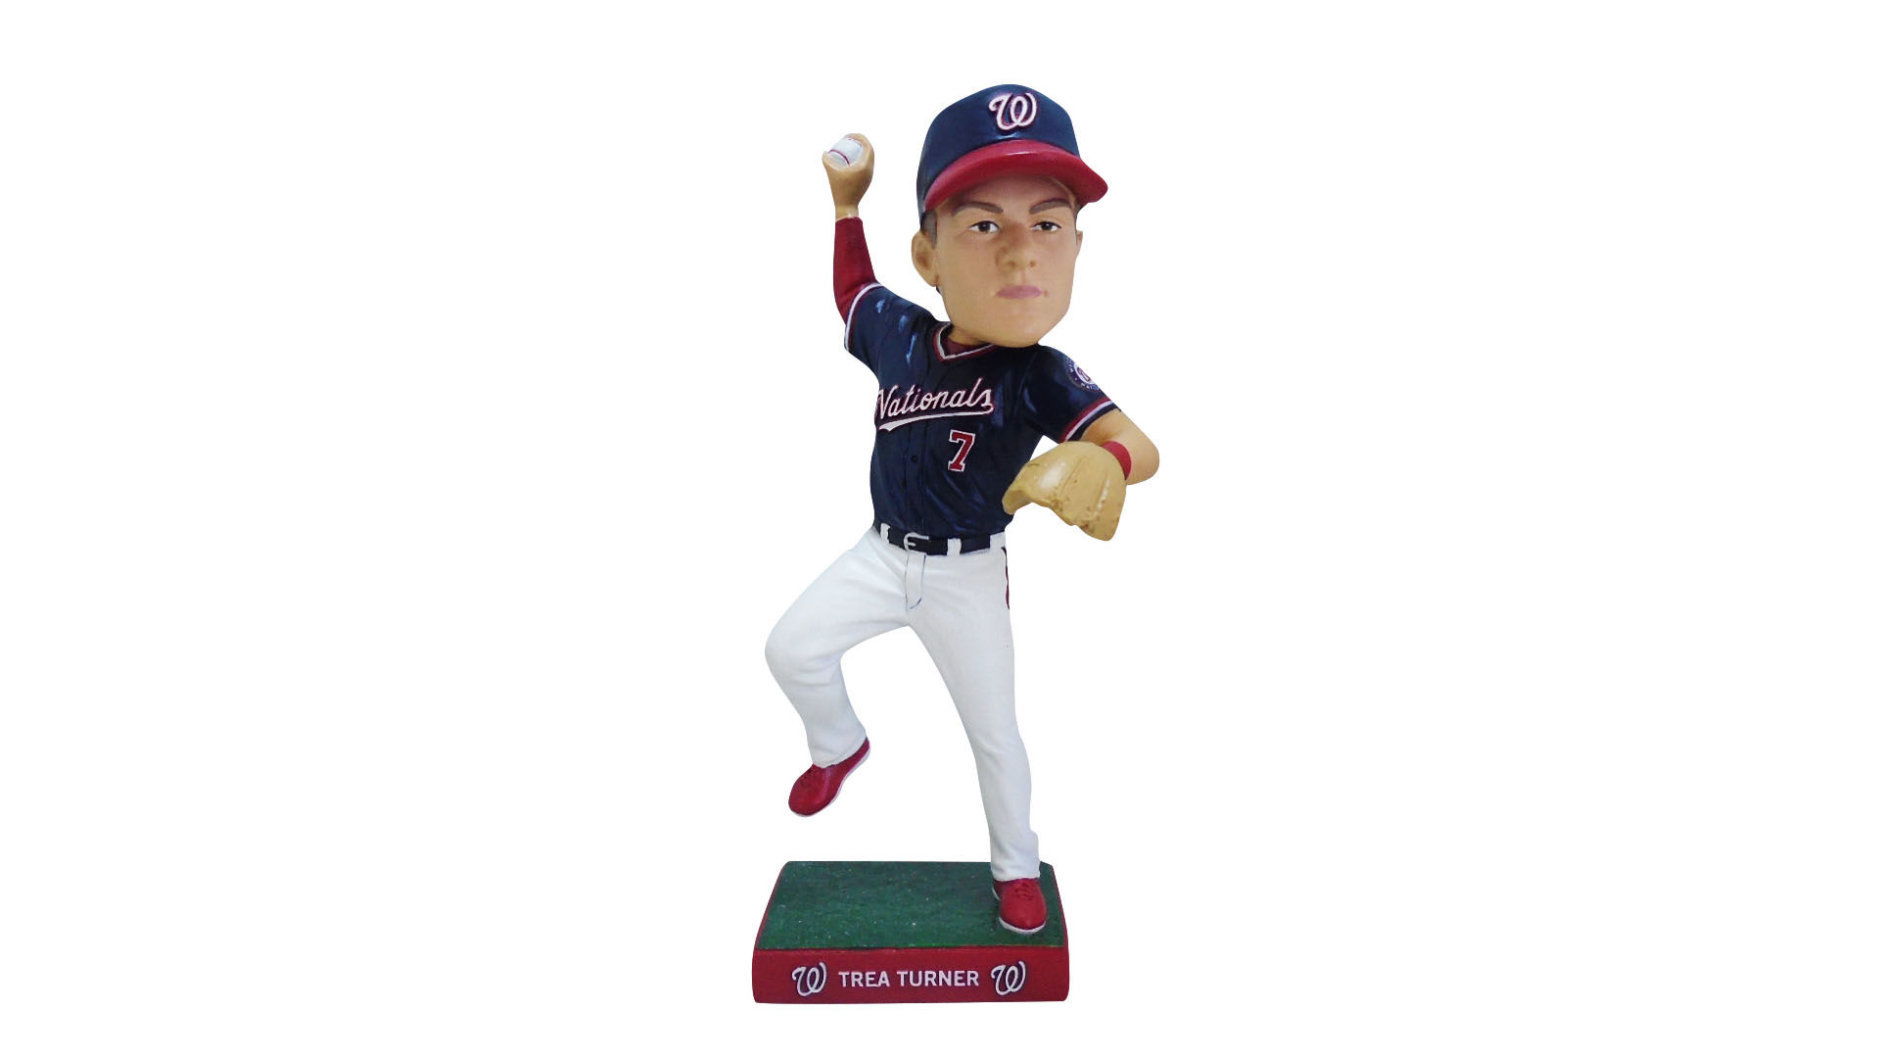 A Trea Turner Bobblehead will be presented by PNC Bank to the first 25,000 fans at the Nationals game on May 15. (Courtesy the Washington Nationals)